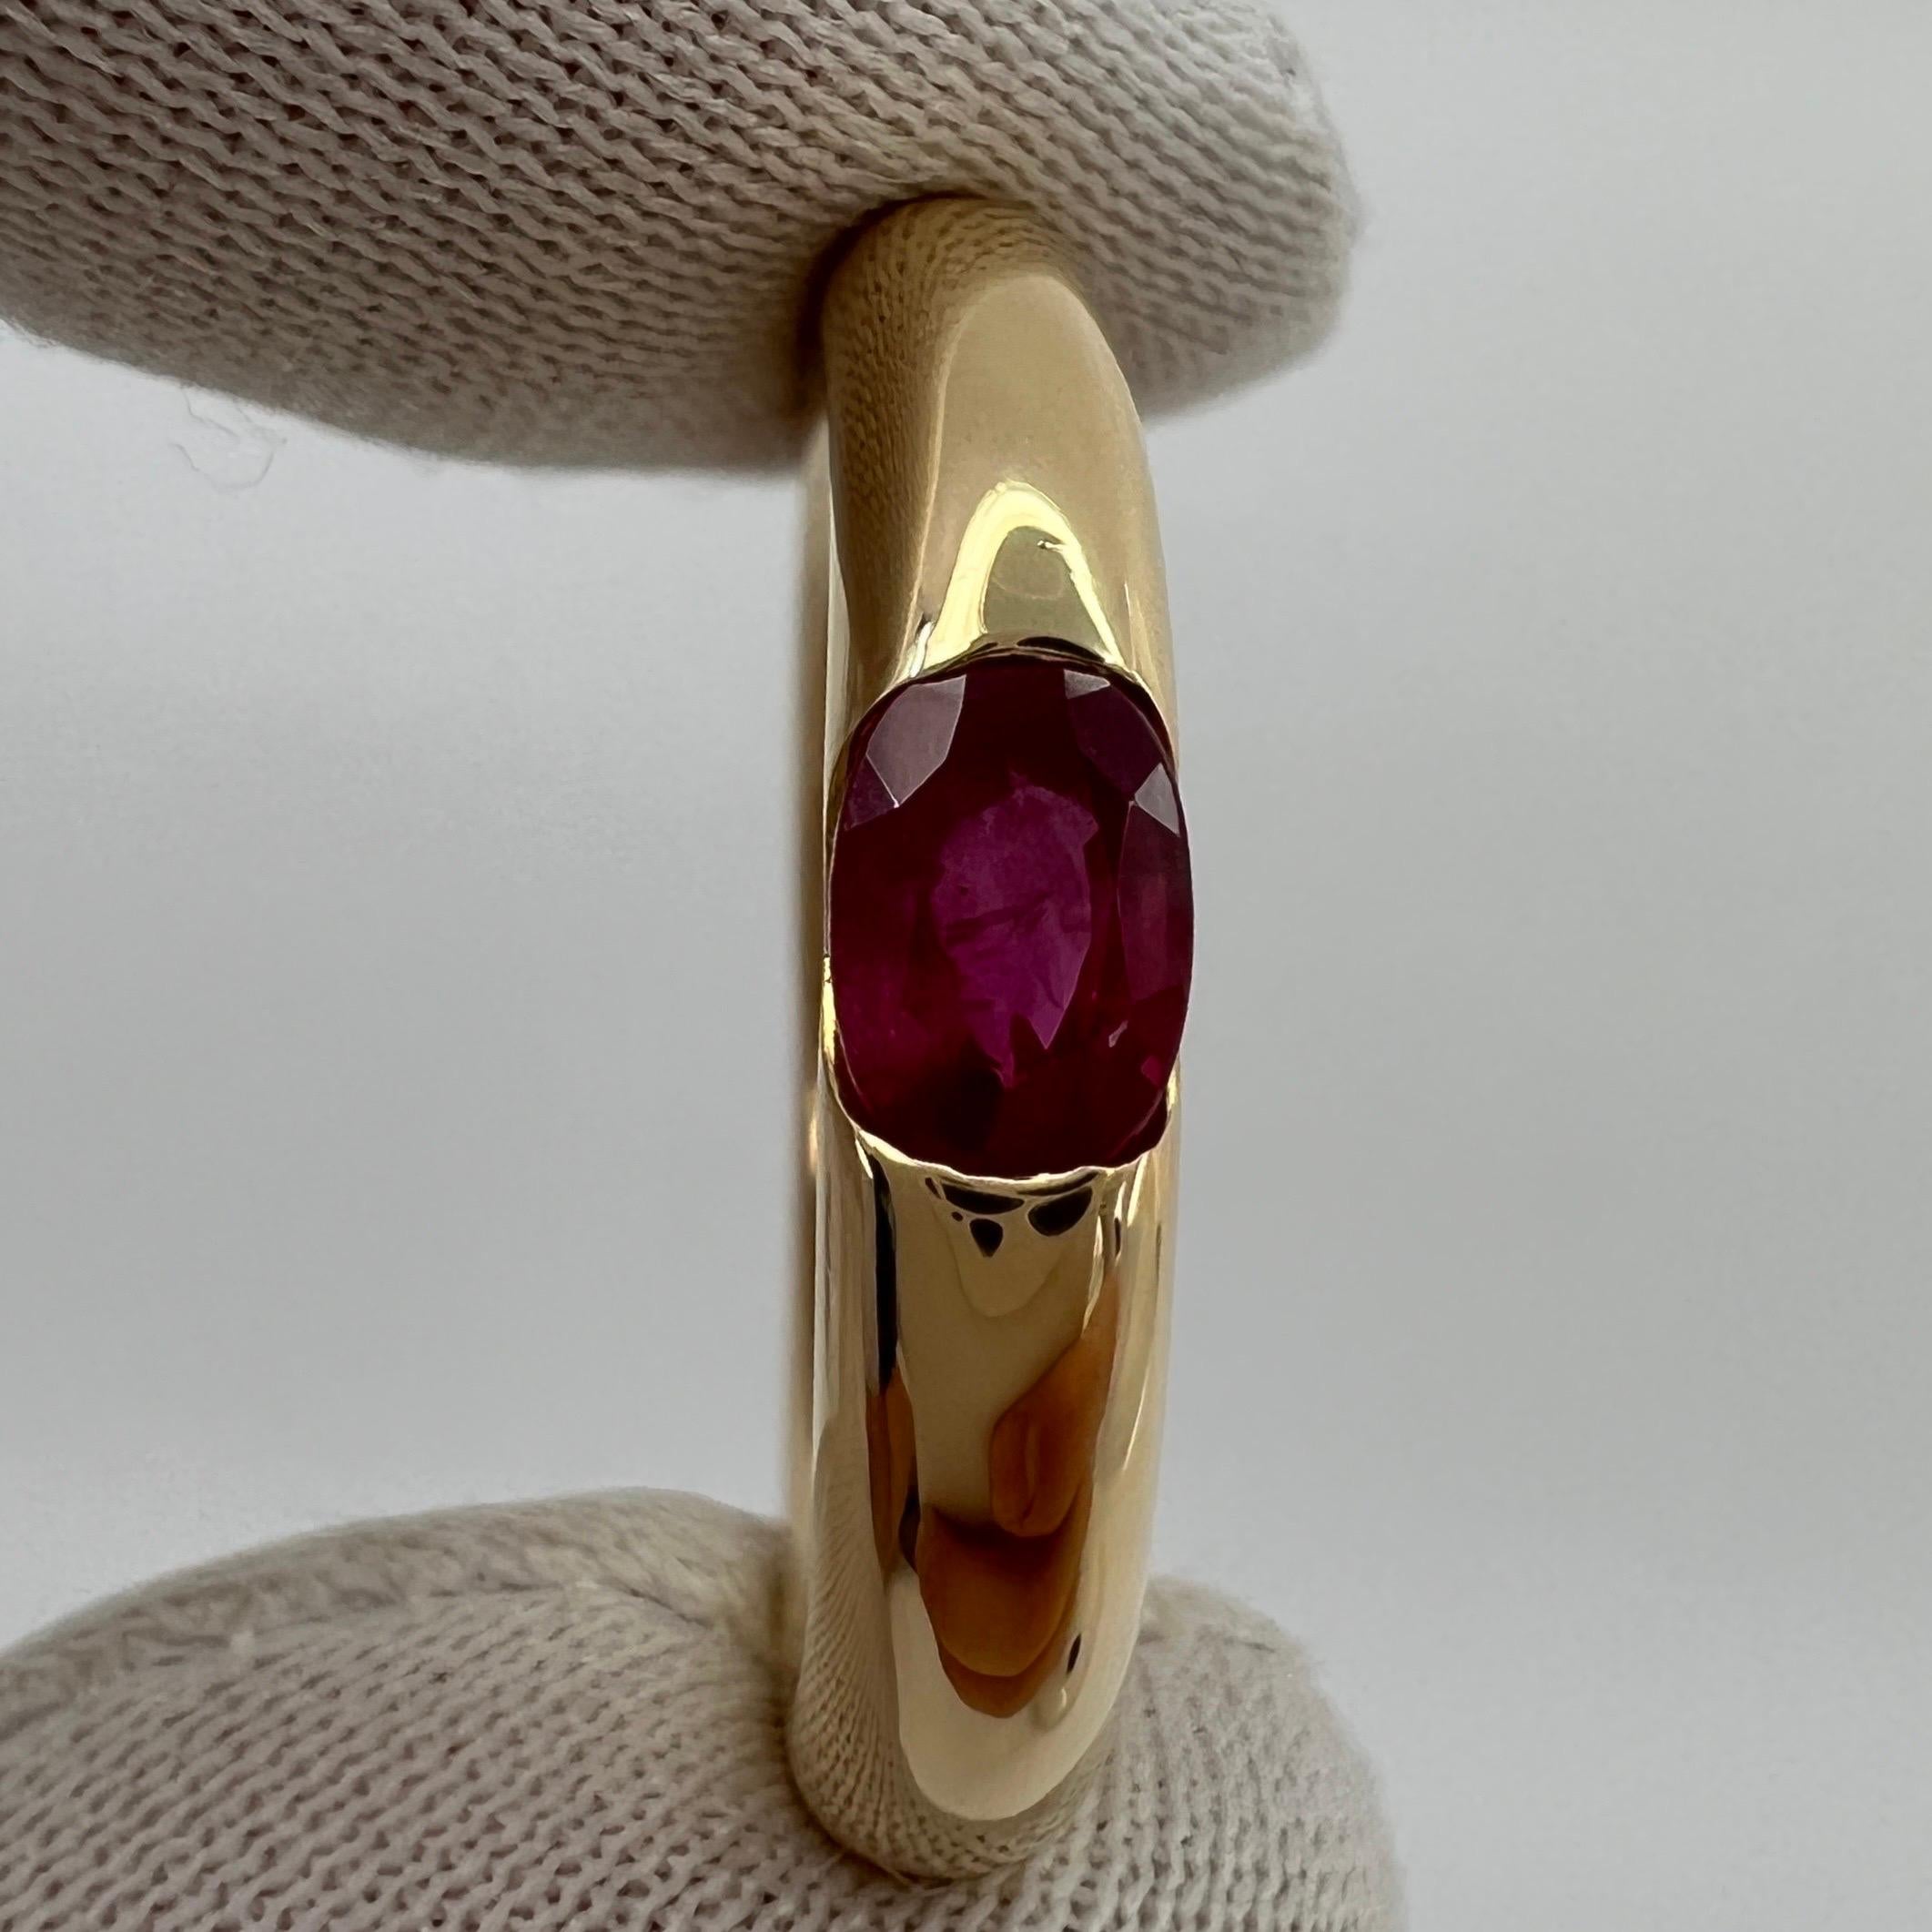 Vintage Cartier Deep Red Ruby 18k Yellow Gold Solitaire Ring.

Stunning yellow gold ring set with a fine deep red ruby. Fine jewellery houses like Cartier only use the finest of gemstones and this ruby is no exception. An excellent quality ruby with